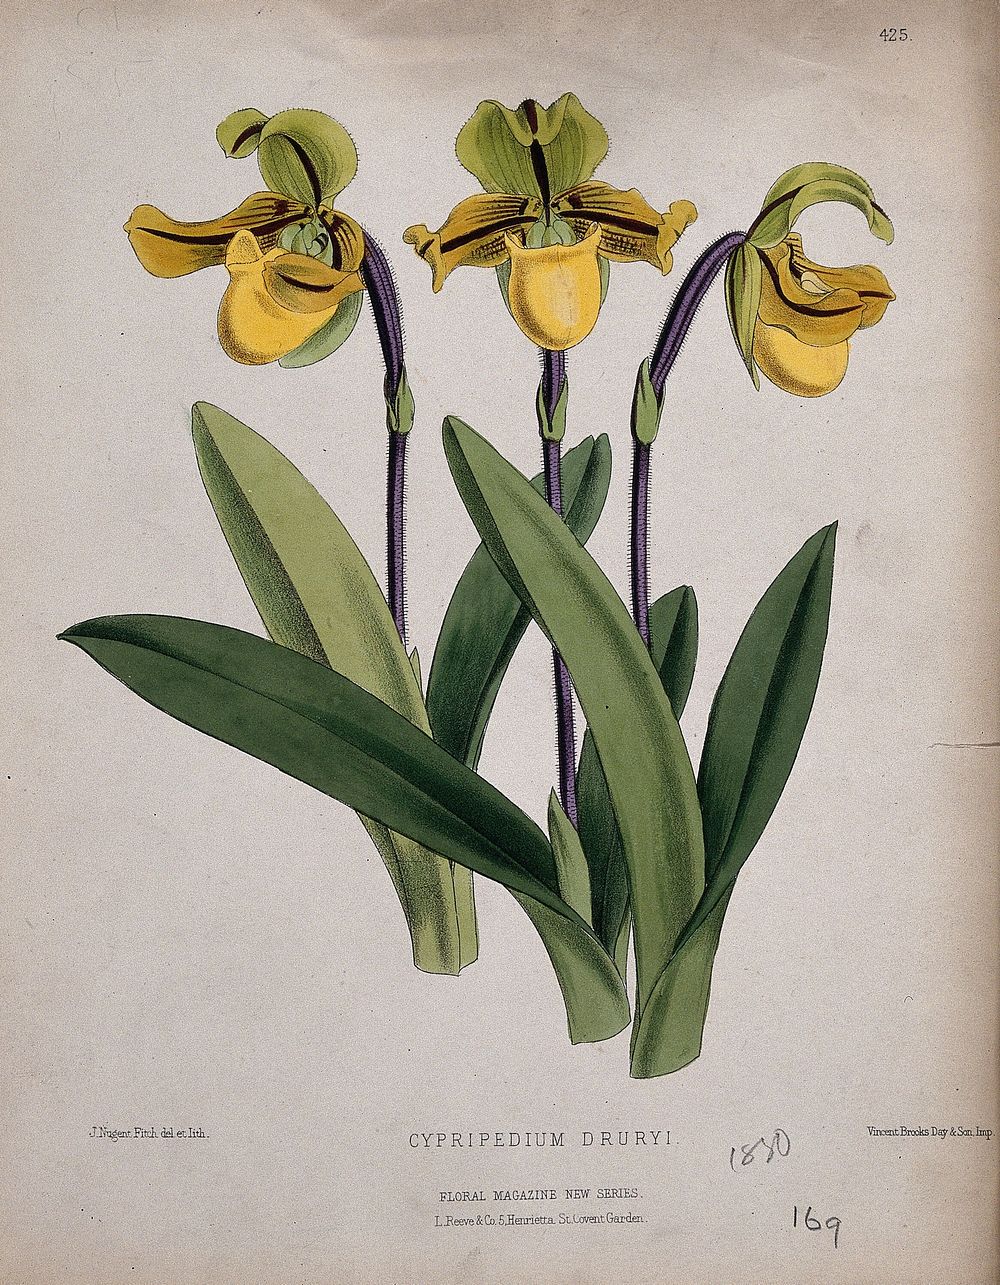 A lady's slipper orchid (Cypripedium drurii): flowering stems. Coloured lithograph by J. N. Fitch, c. 1880, after himself.